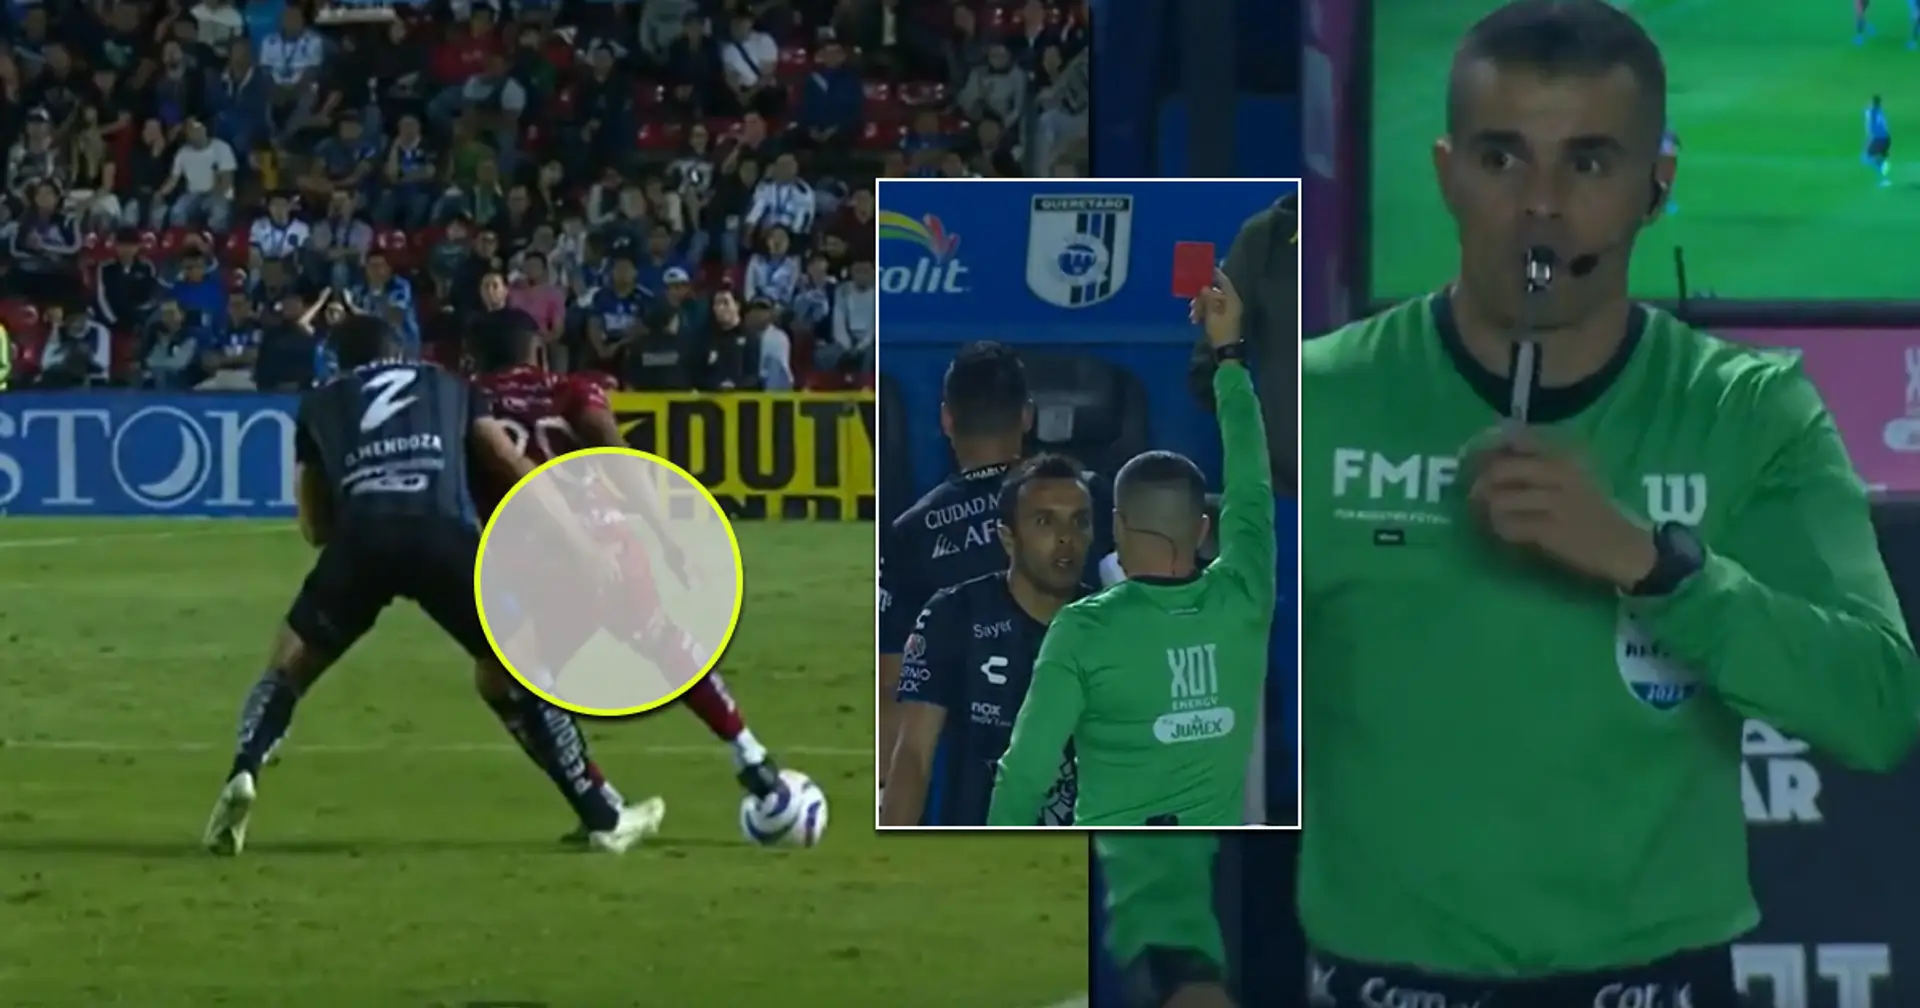 'He gave him the scratch & sniff': Footballer sent off for putting his fingers up opponent's a**